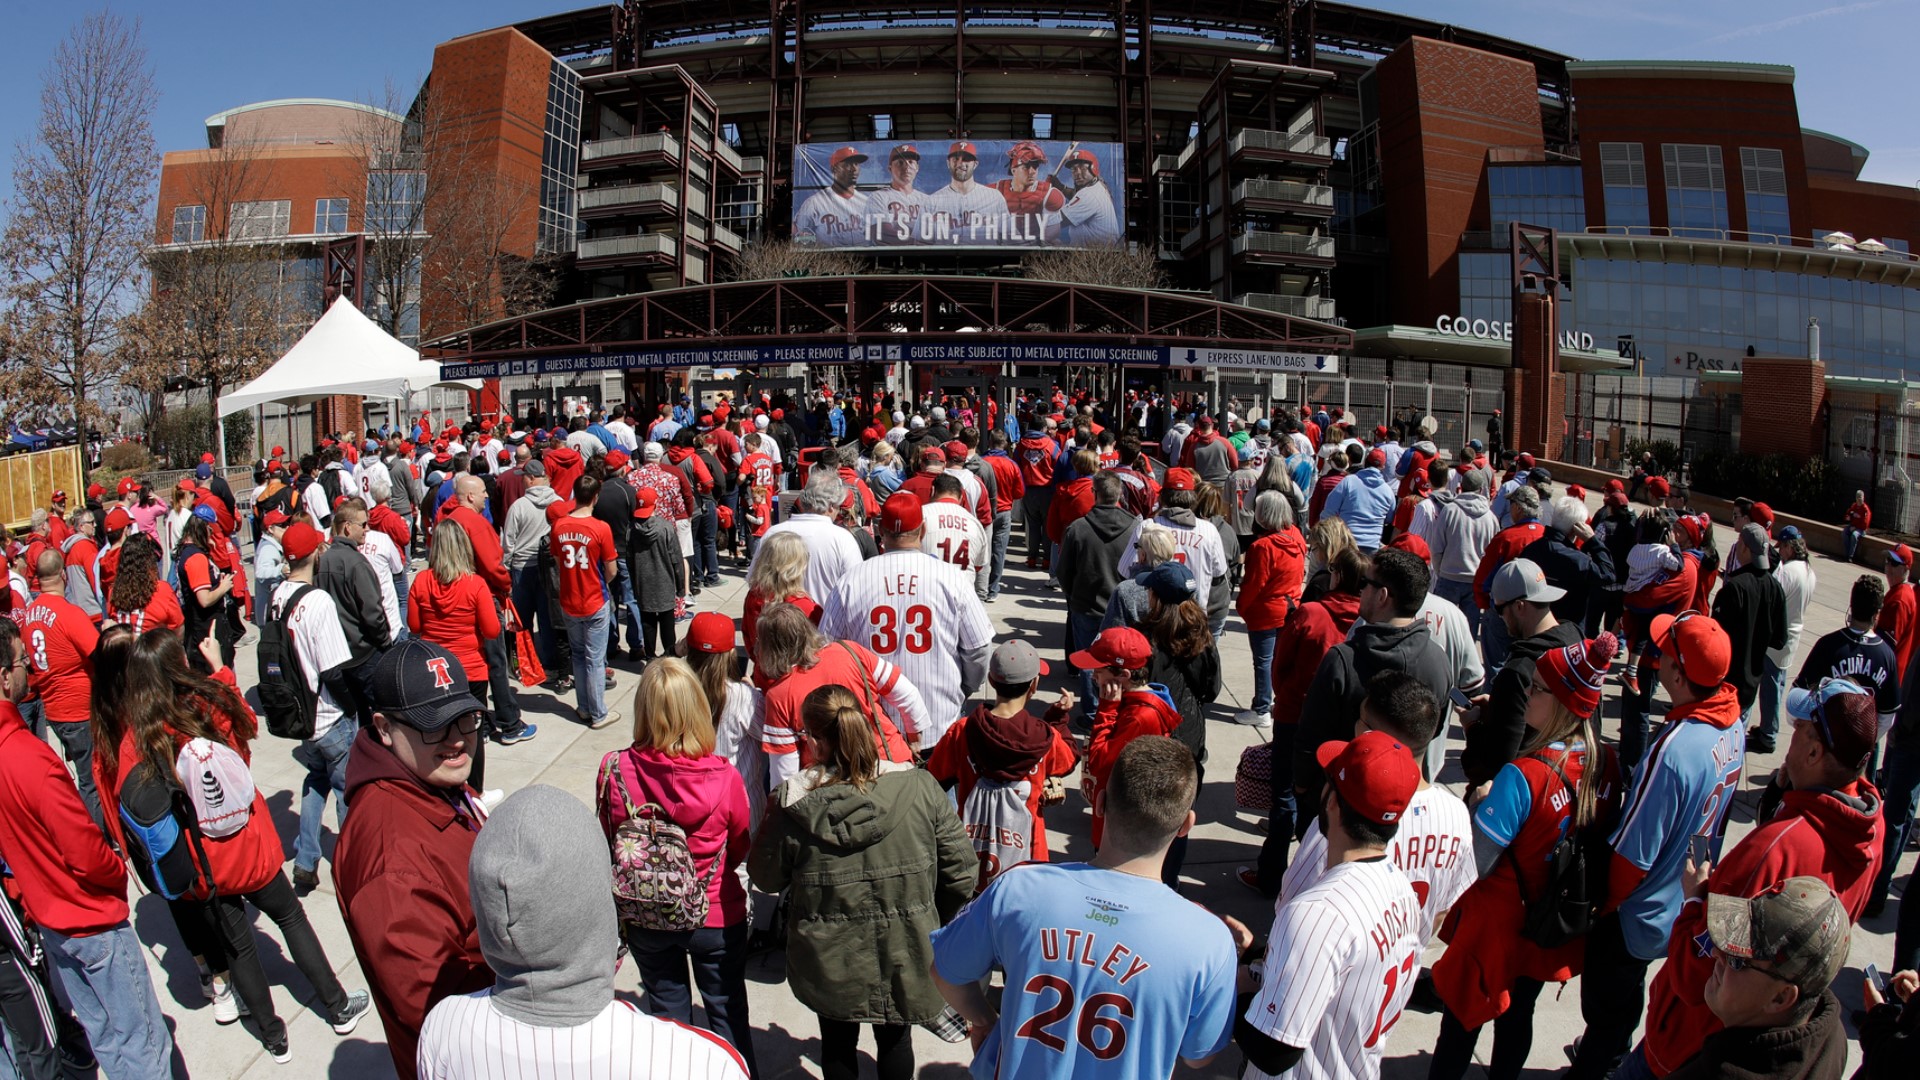 The Philadelphia Phillies are set to host the team's first World Series game since 2009, and we are getting a behind-the-scenes look at the ballpark.